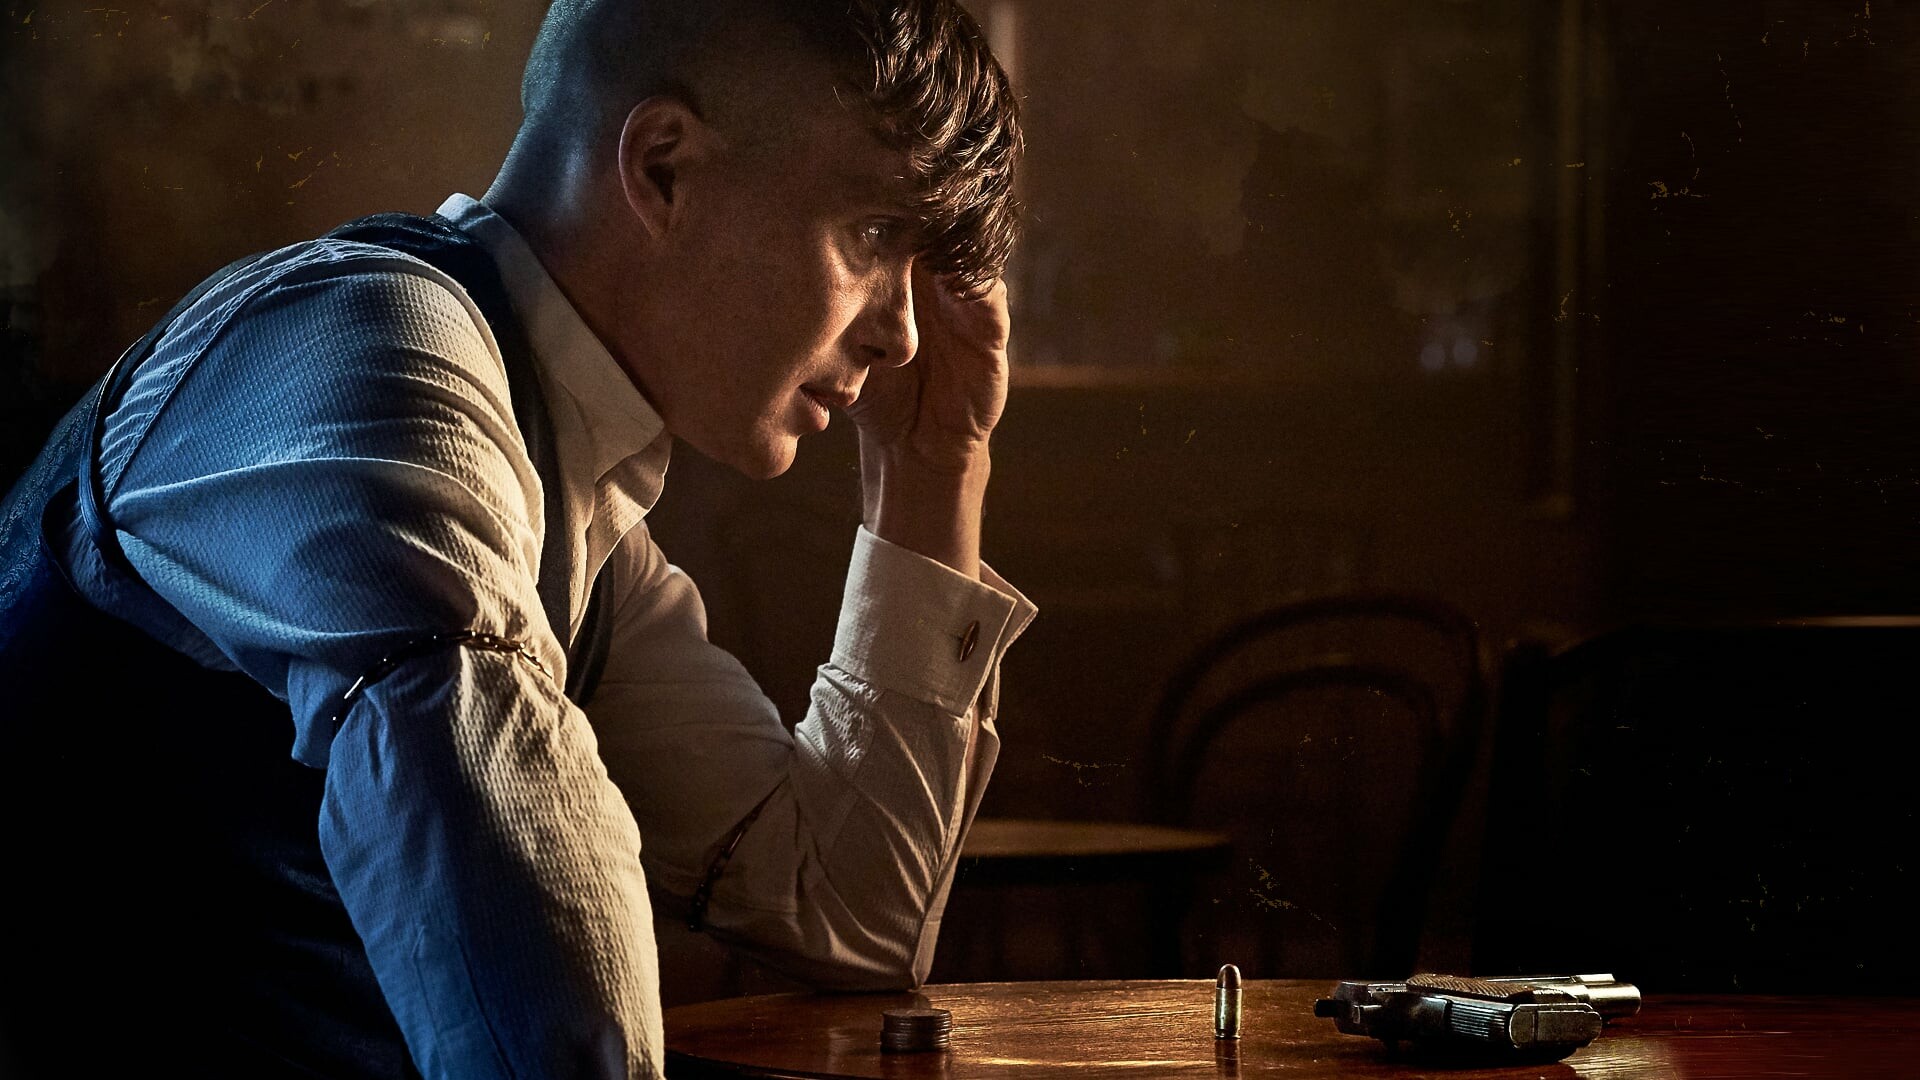 Peaky Blinders: The second of the Shelby siblings, Historical fiction, Crime drama. 1920x1080 Full HD Wallpaper.